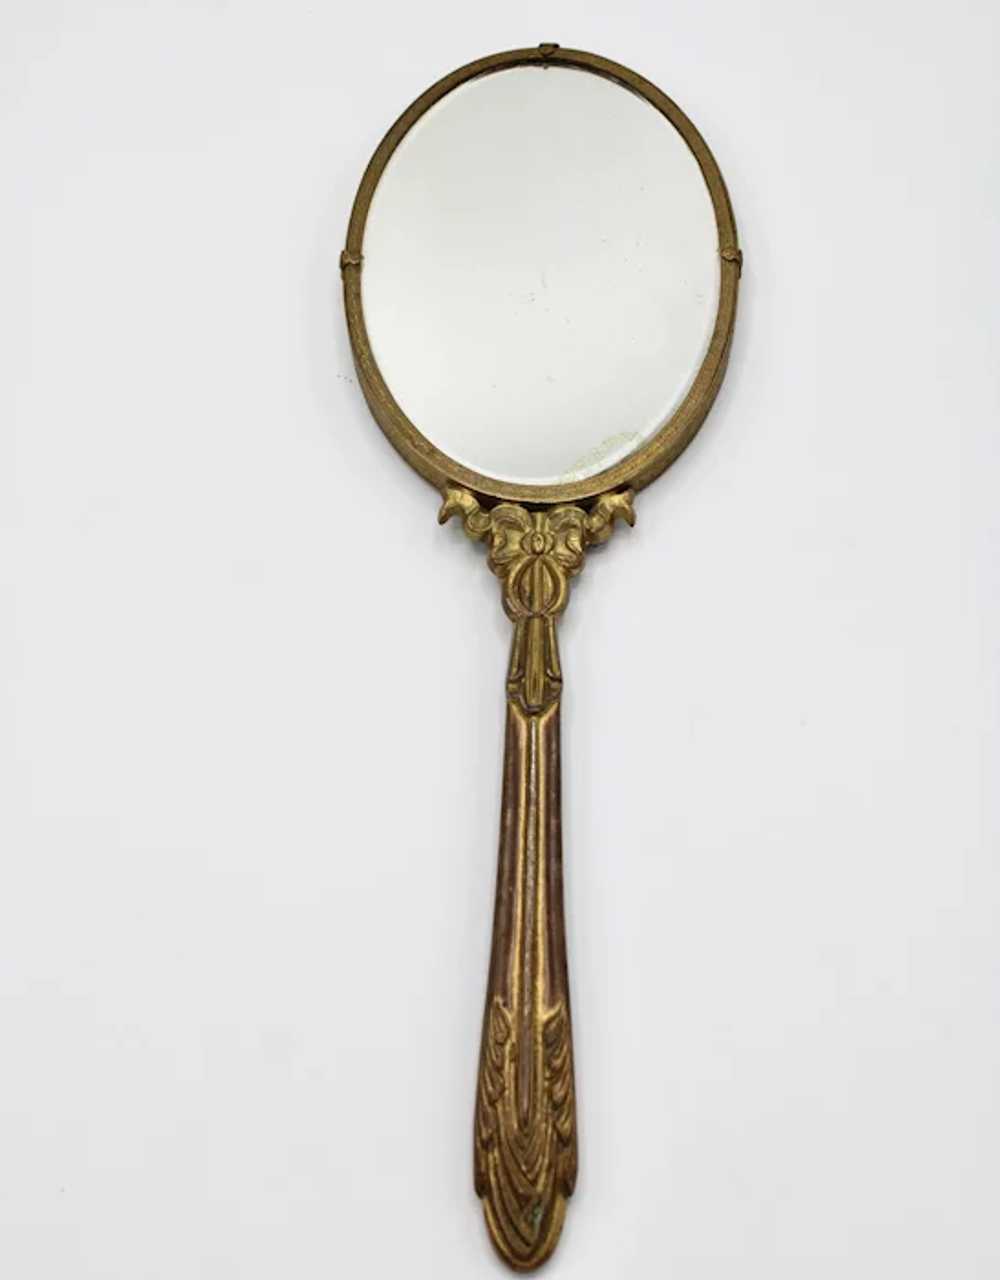 Antique French Hand Held Mirror - image 3